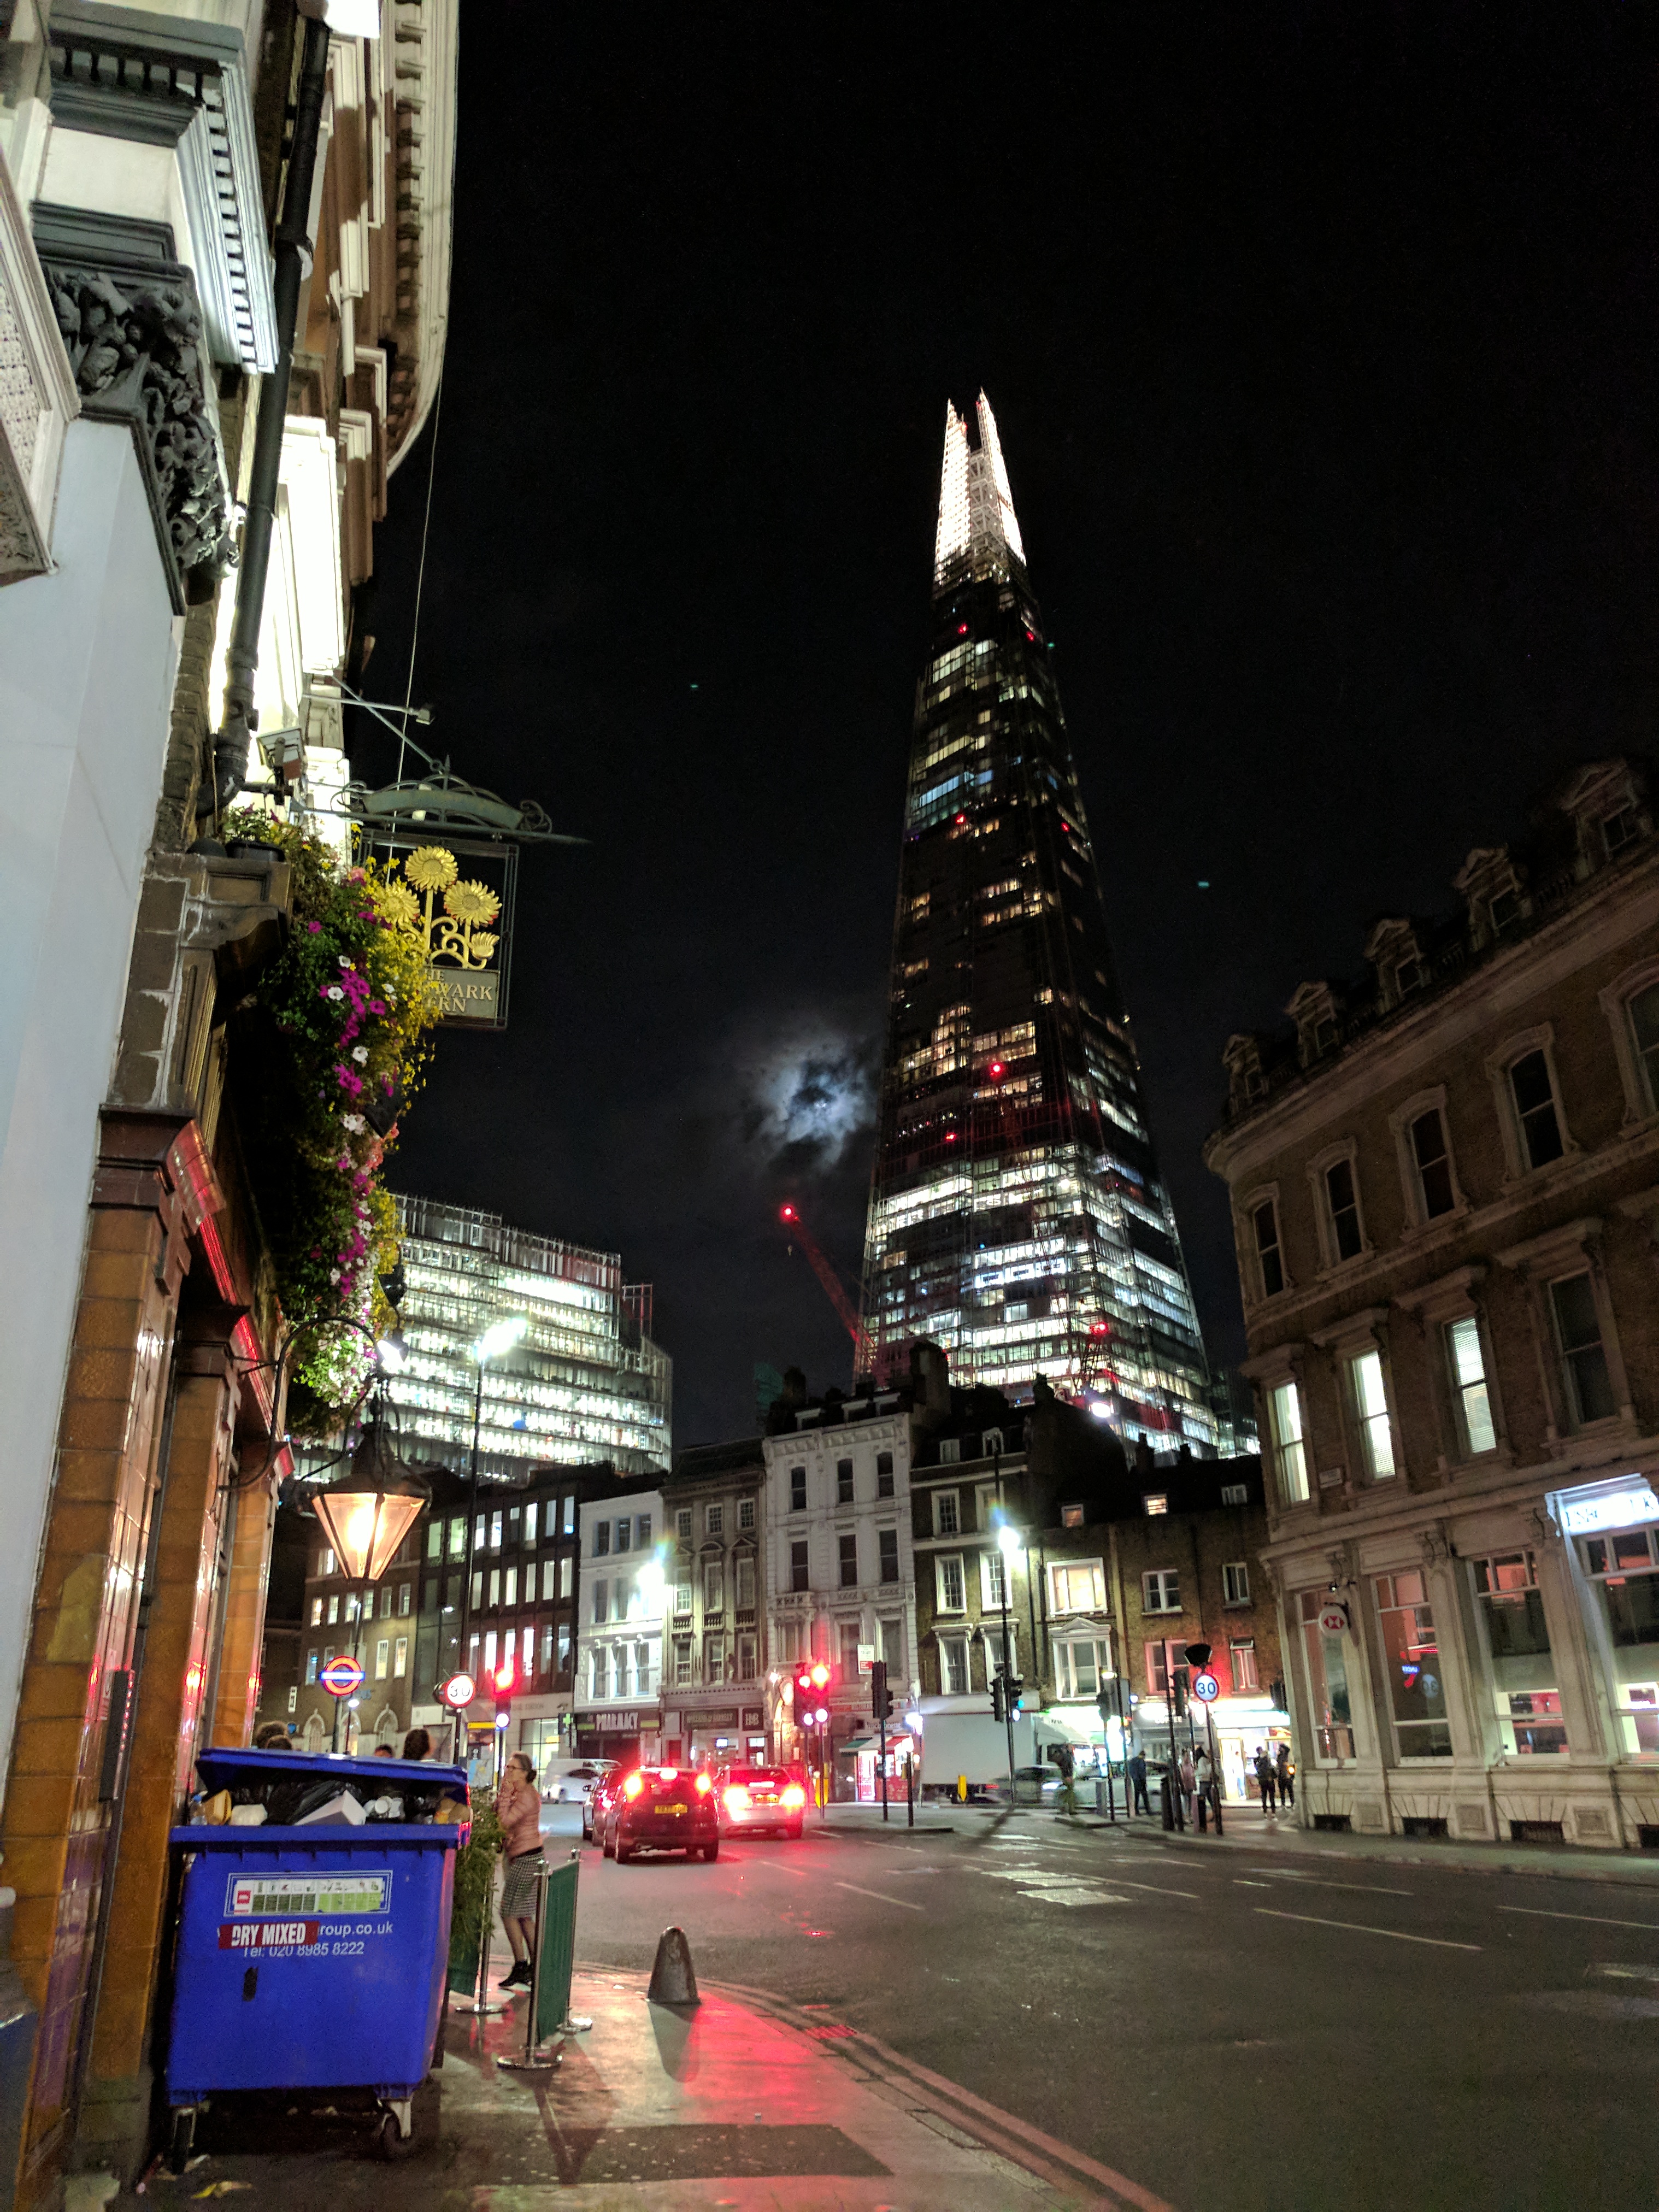 Looking up at The Shard, the moon poking through the clouds, and an overflowing dumpster on the street.